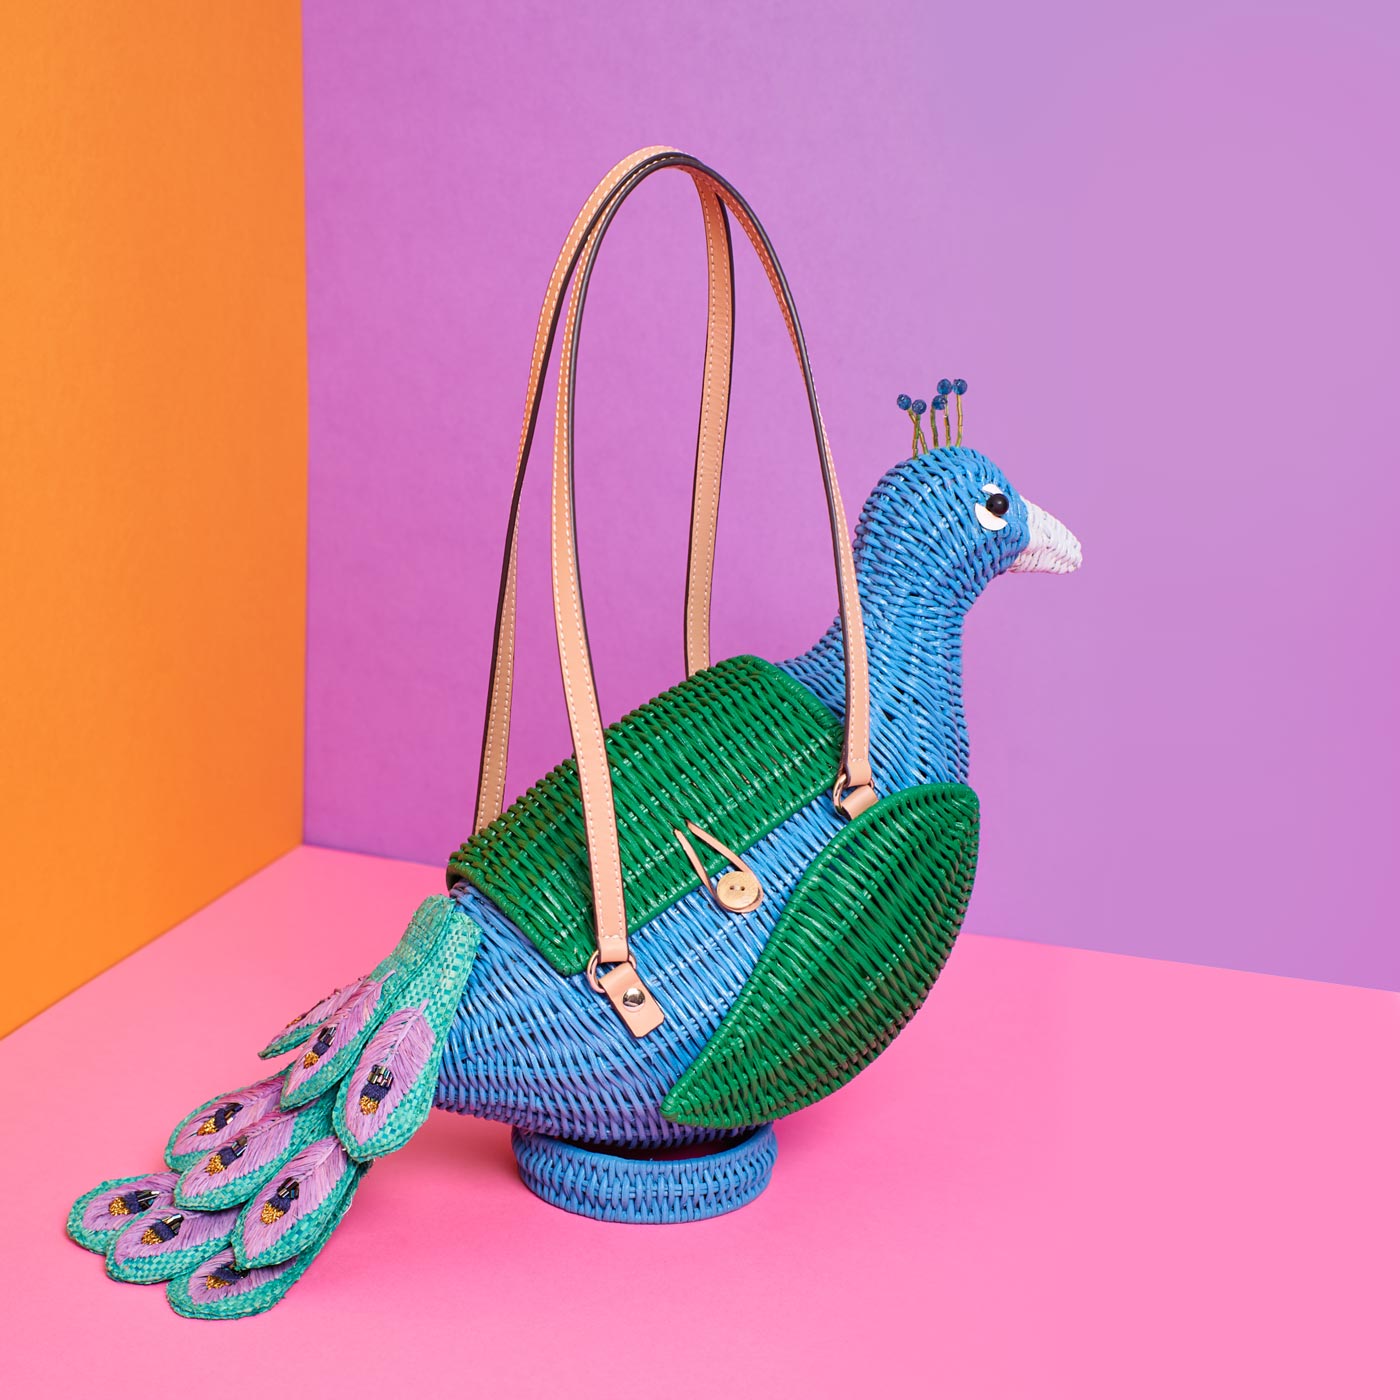 Wicker Darling's Percy the peacock purse